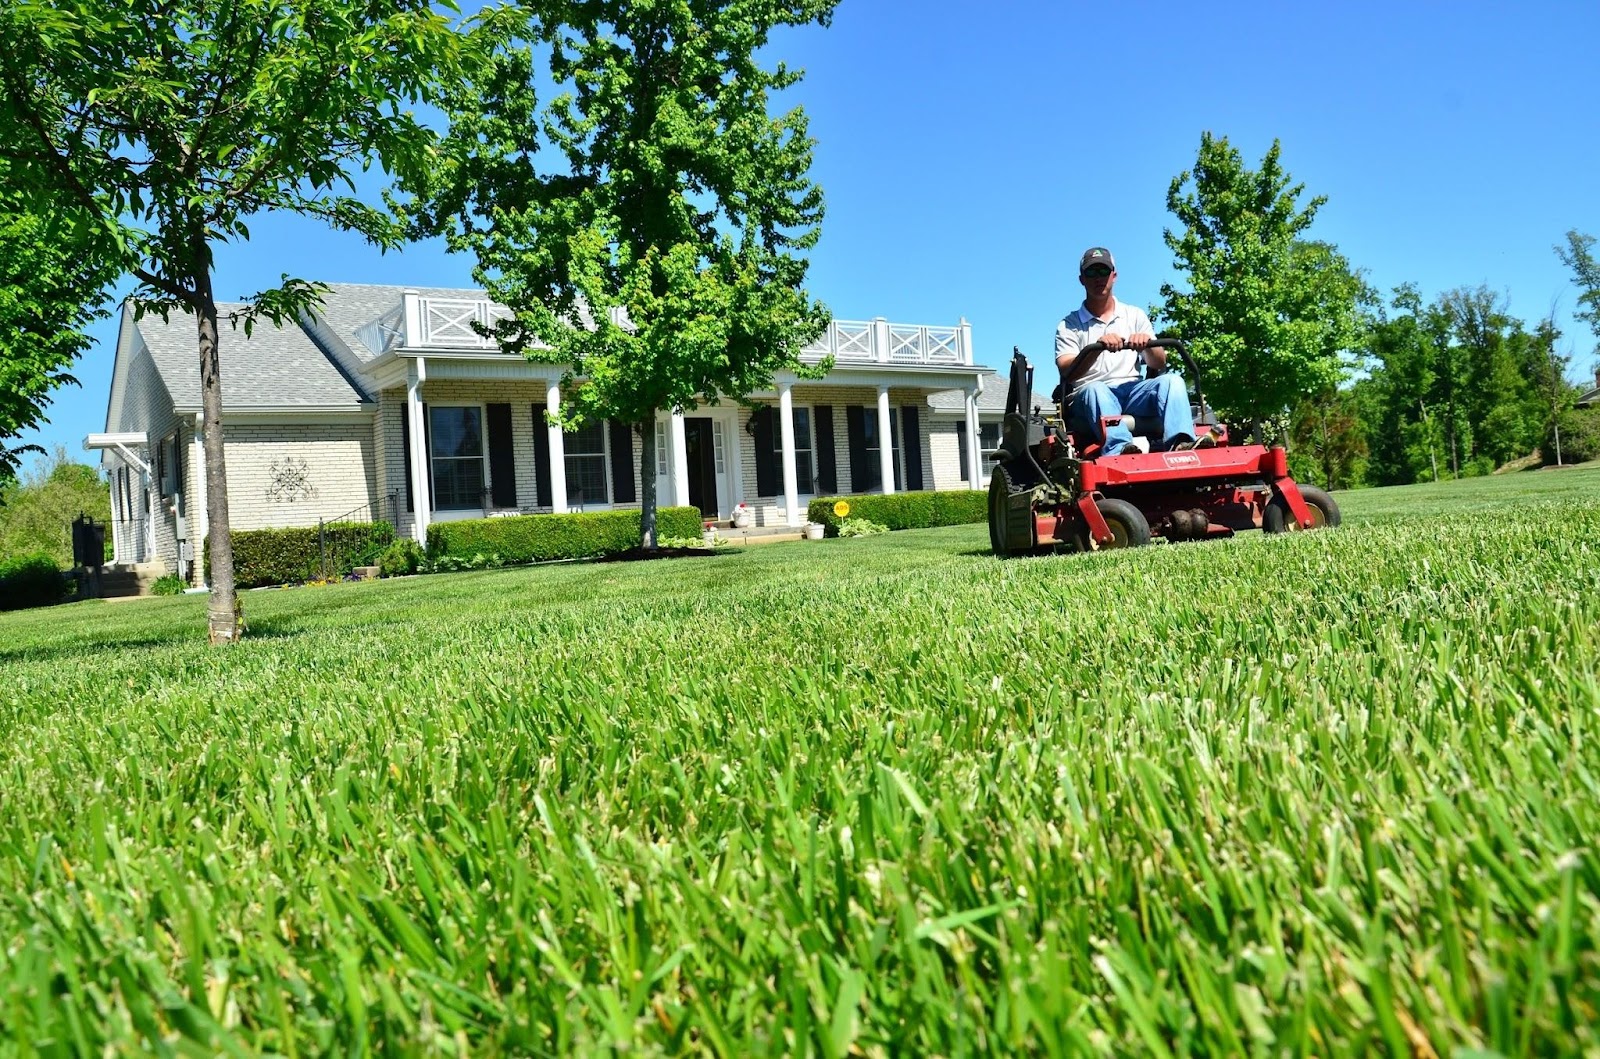 Blossom Your Lawn: Premier Lawn Care Services in Spring, TX